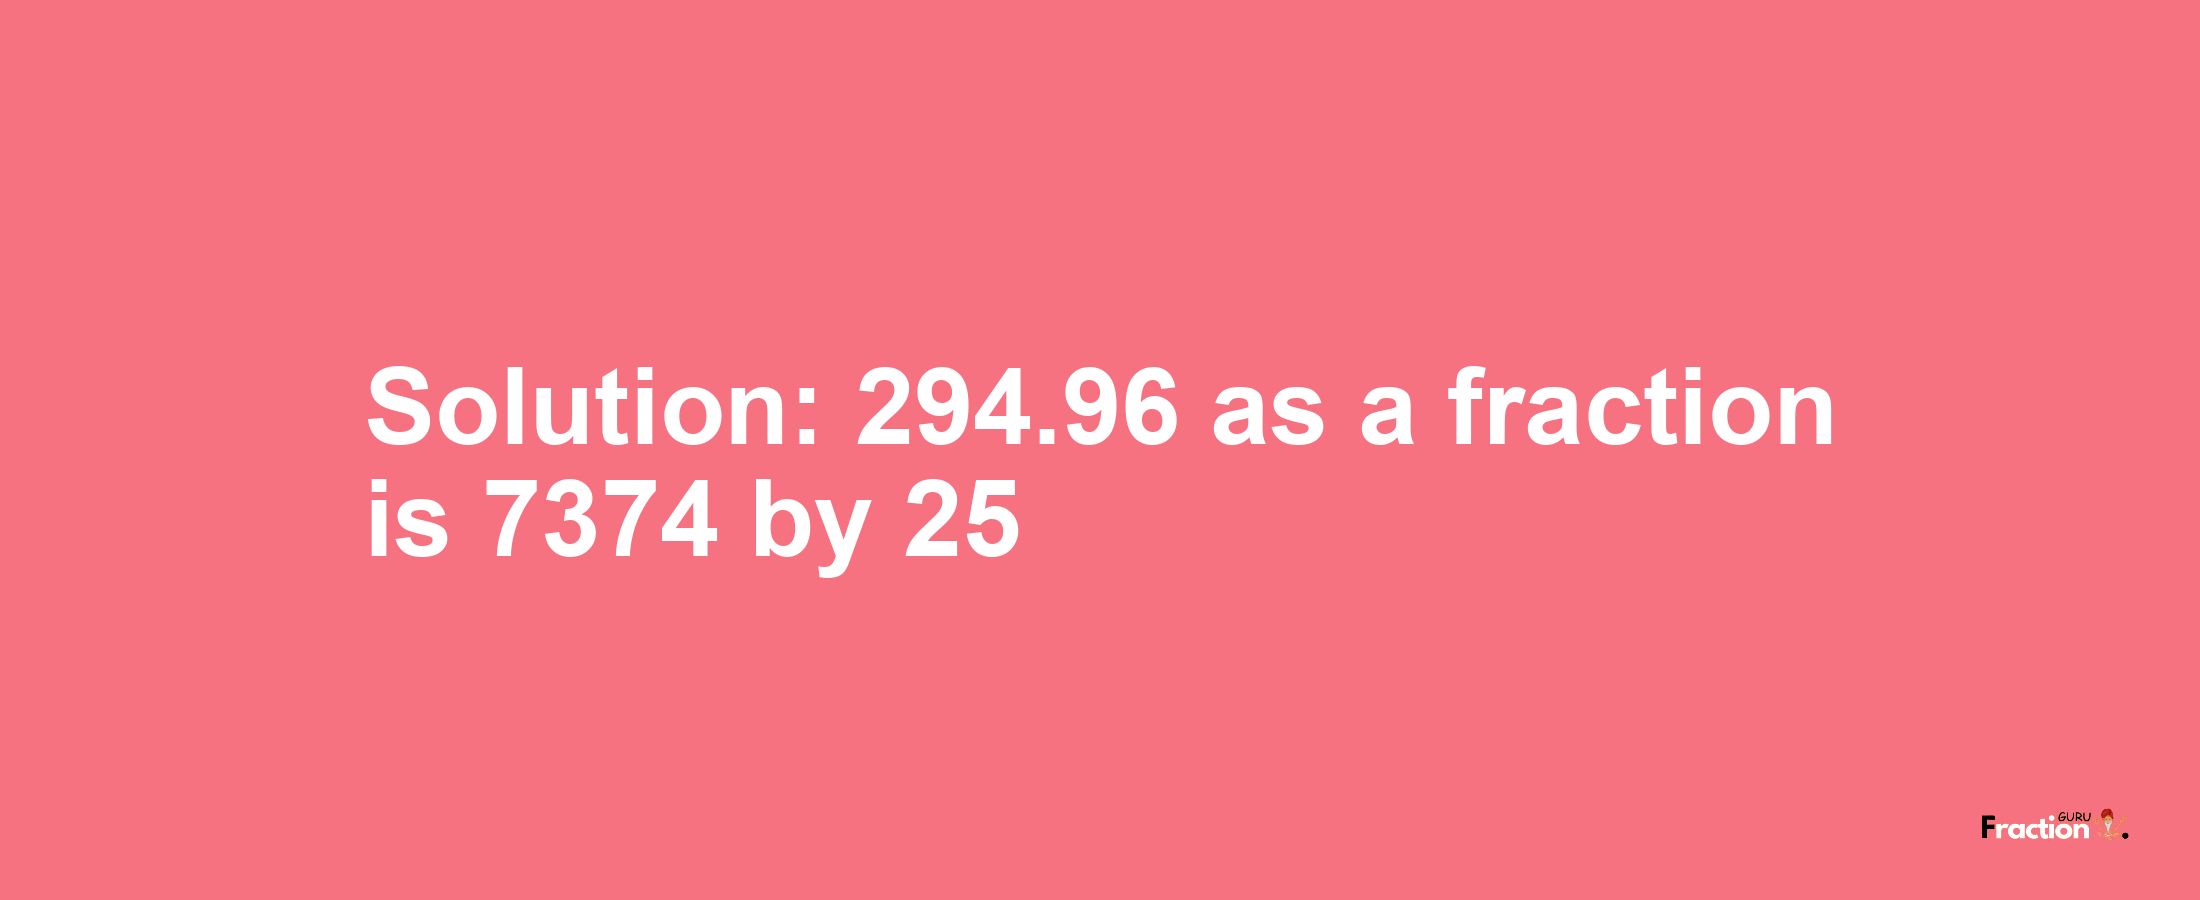 Solution:294.96 as a fraction is 7374/25